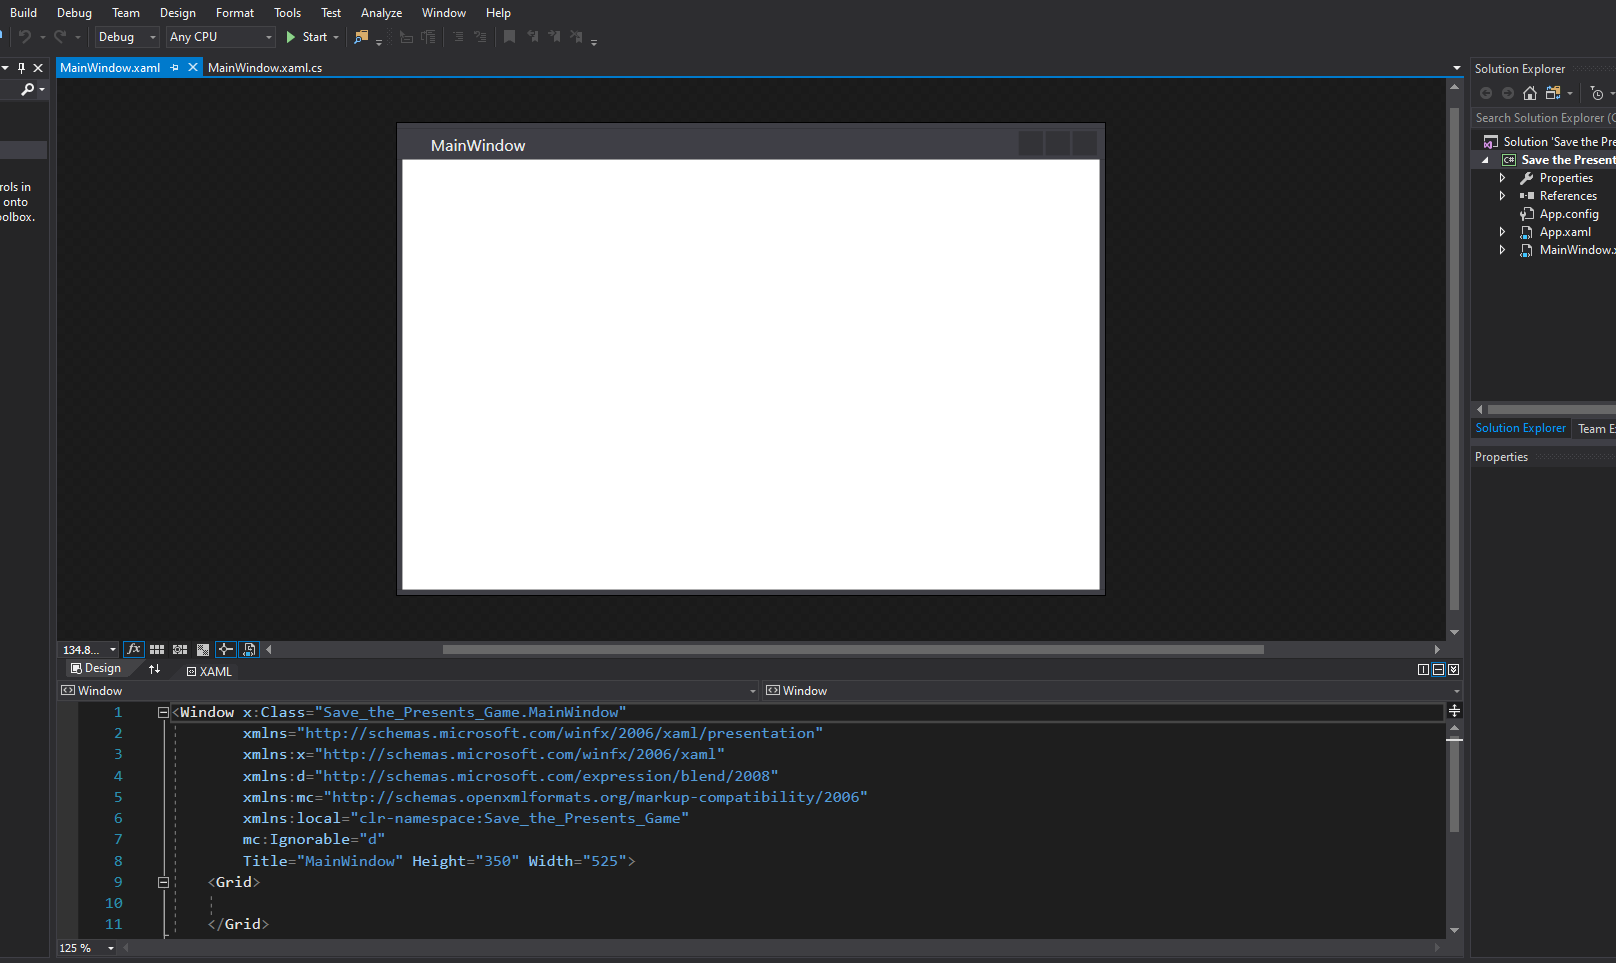 mooict wpf c# save the presents game - default window layout in visual studio